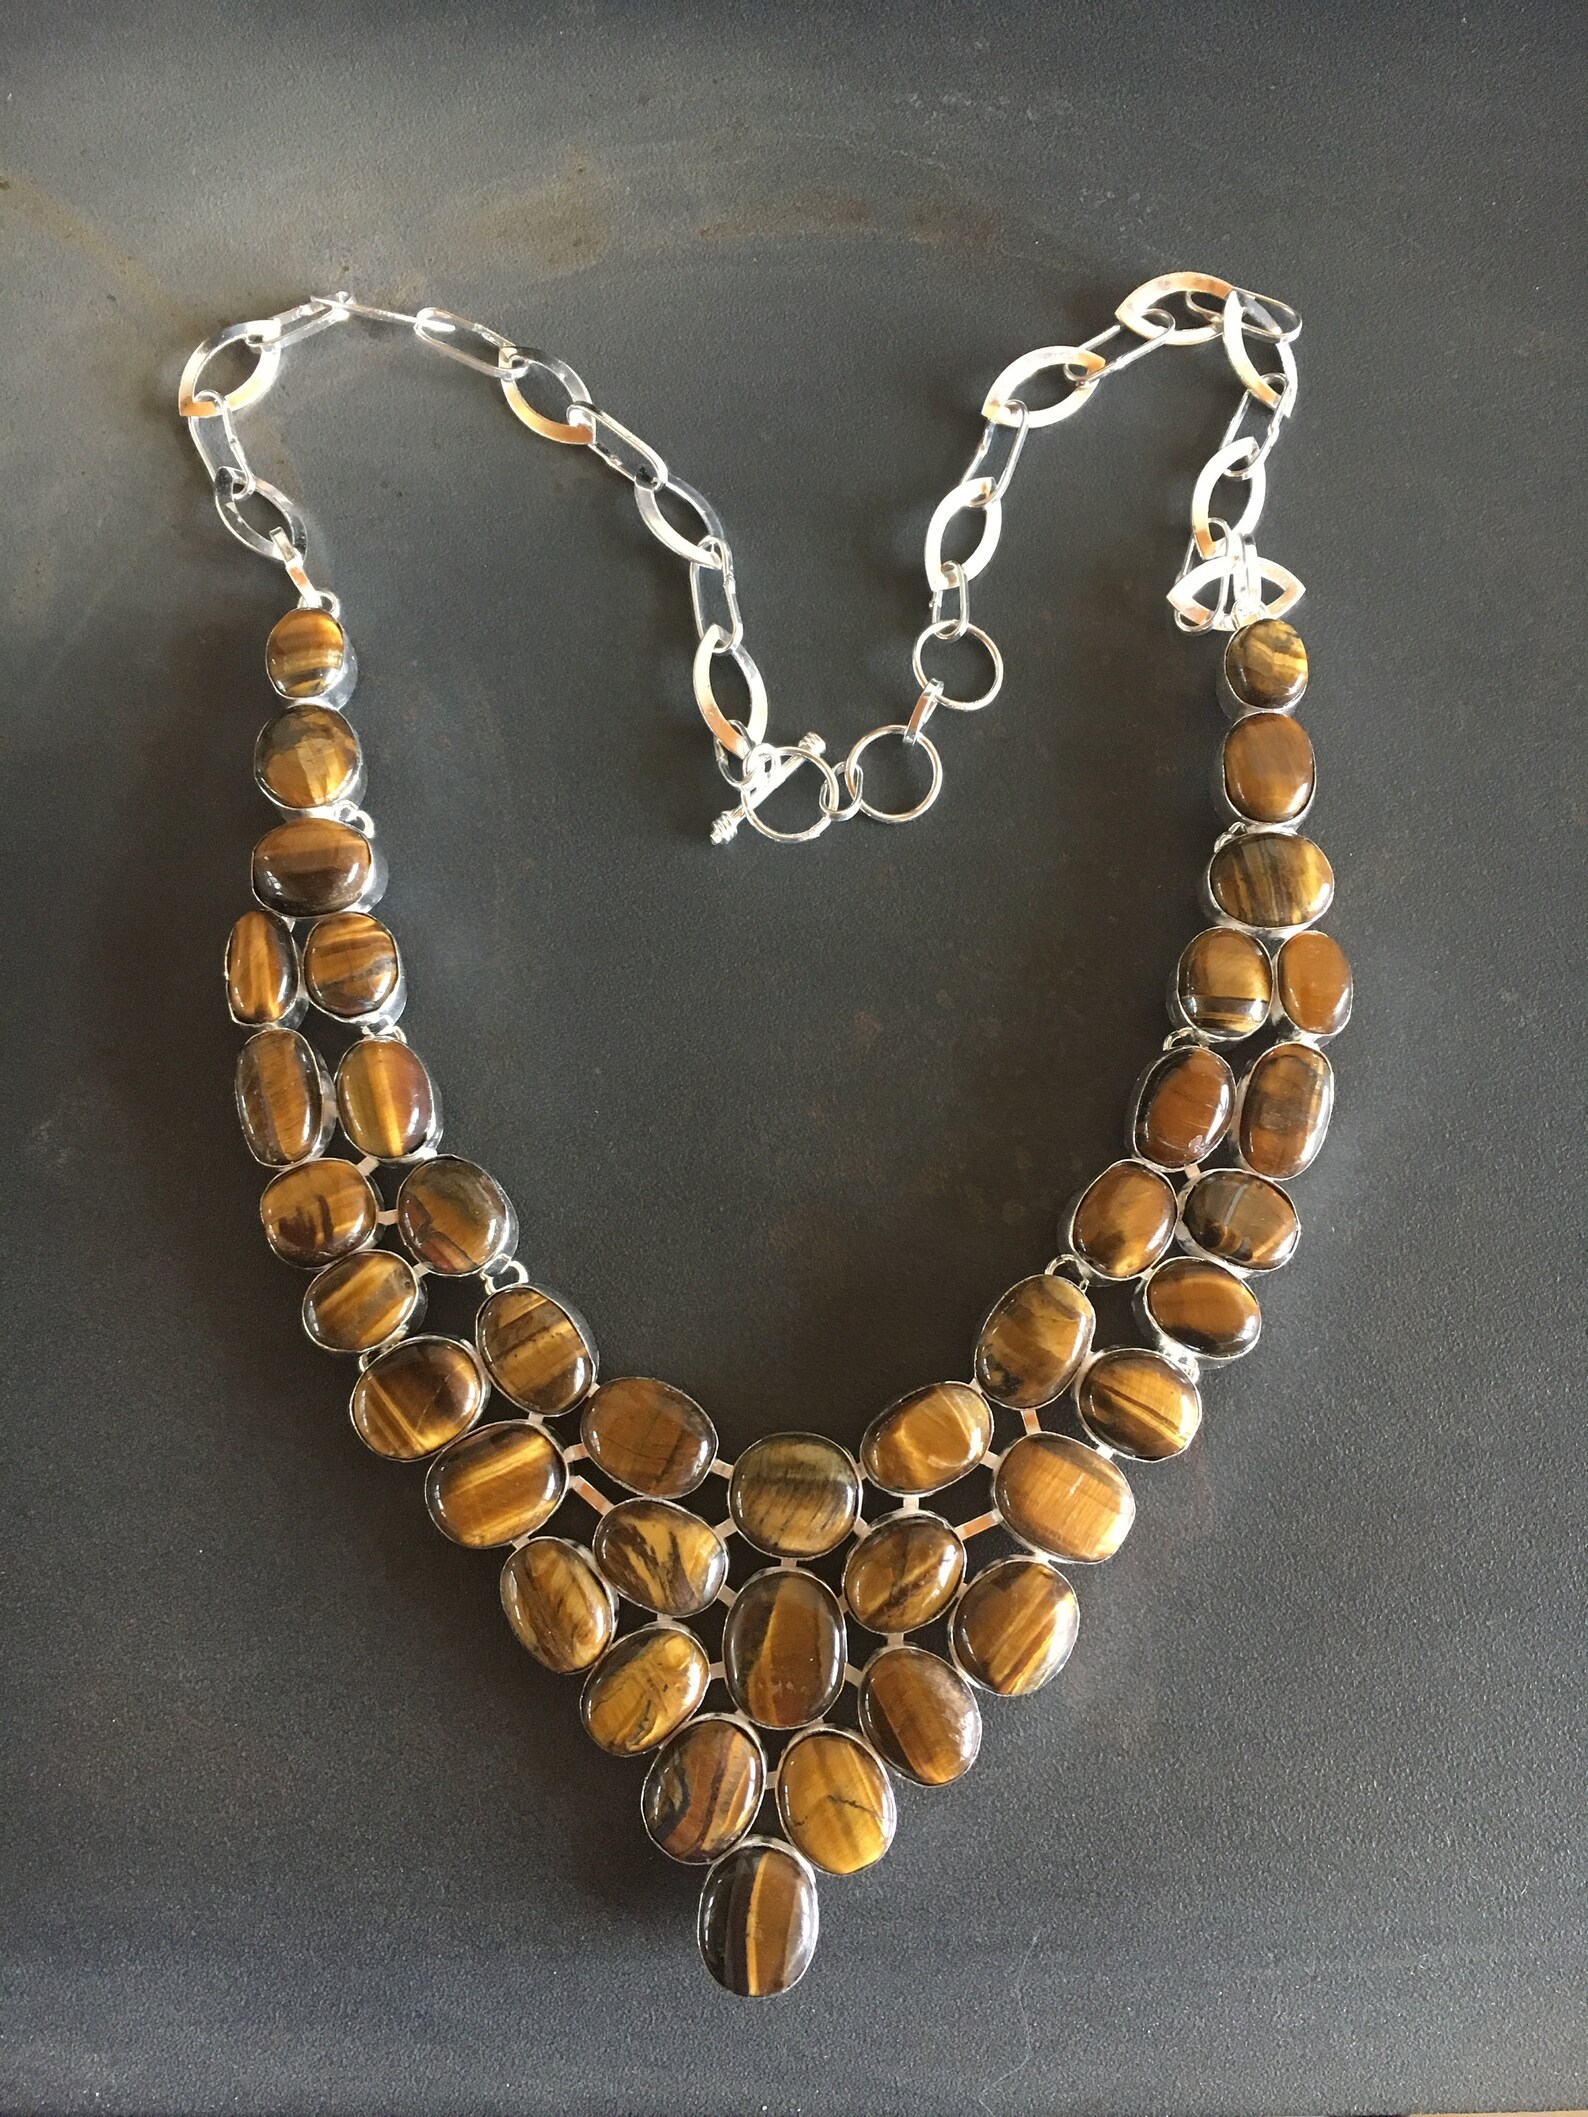 Tigers Eye Necklace, Bib Necklace, Gem Stones, More than 30 Stones in ...